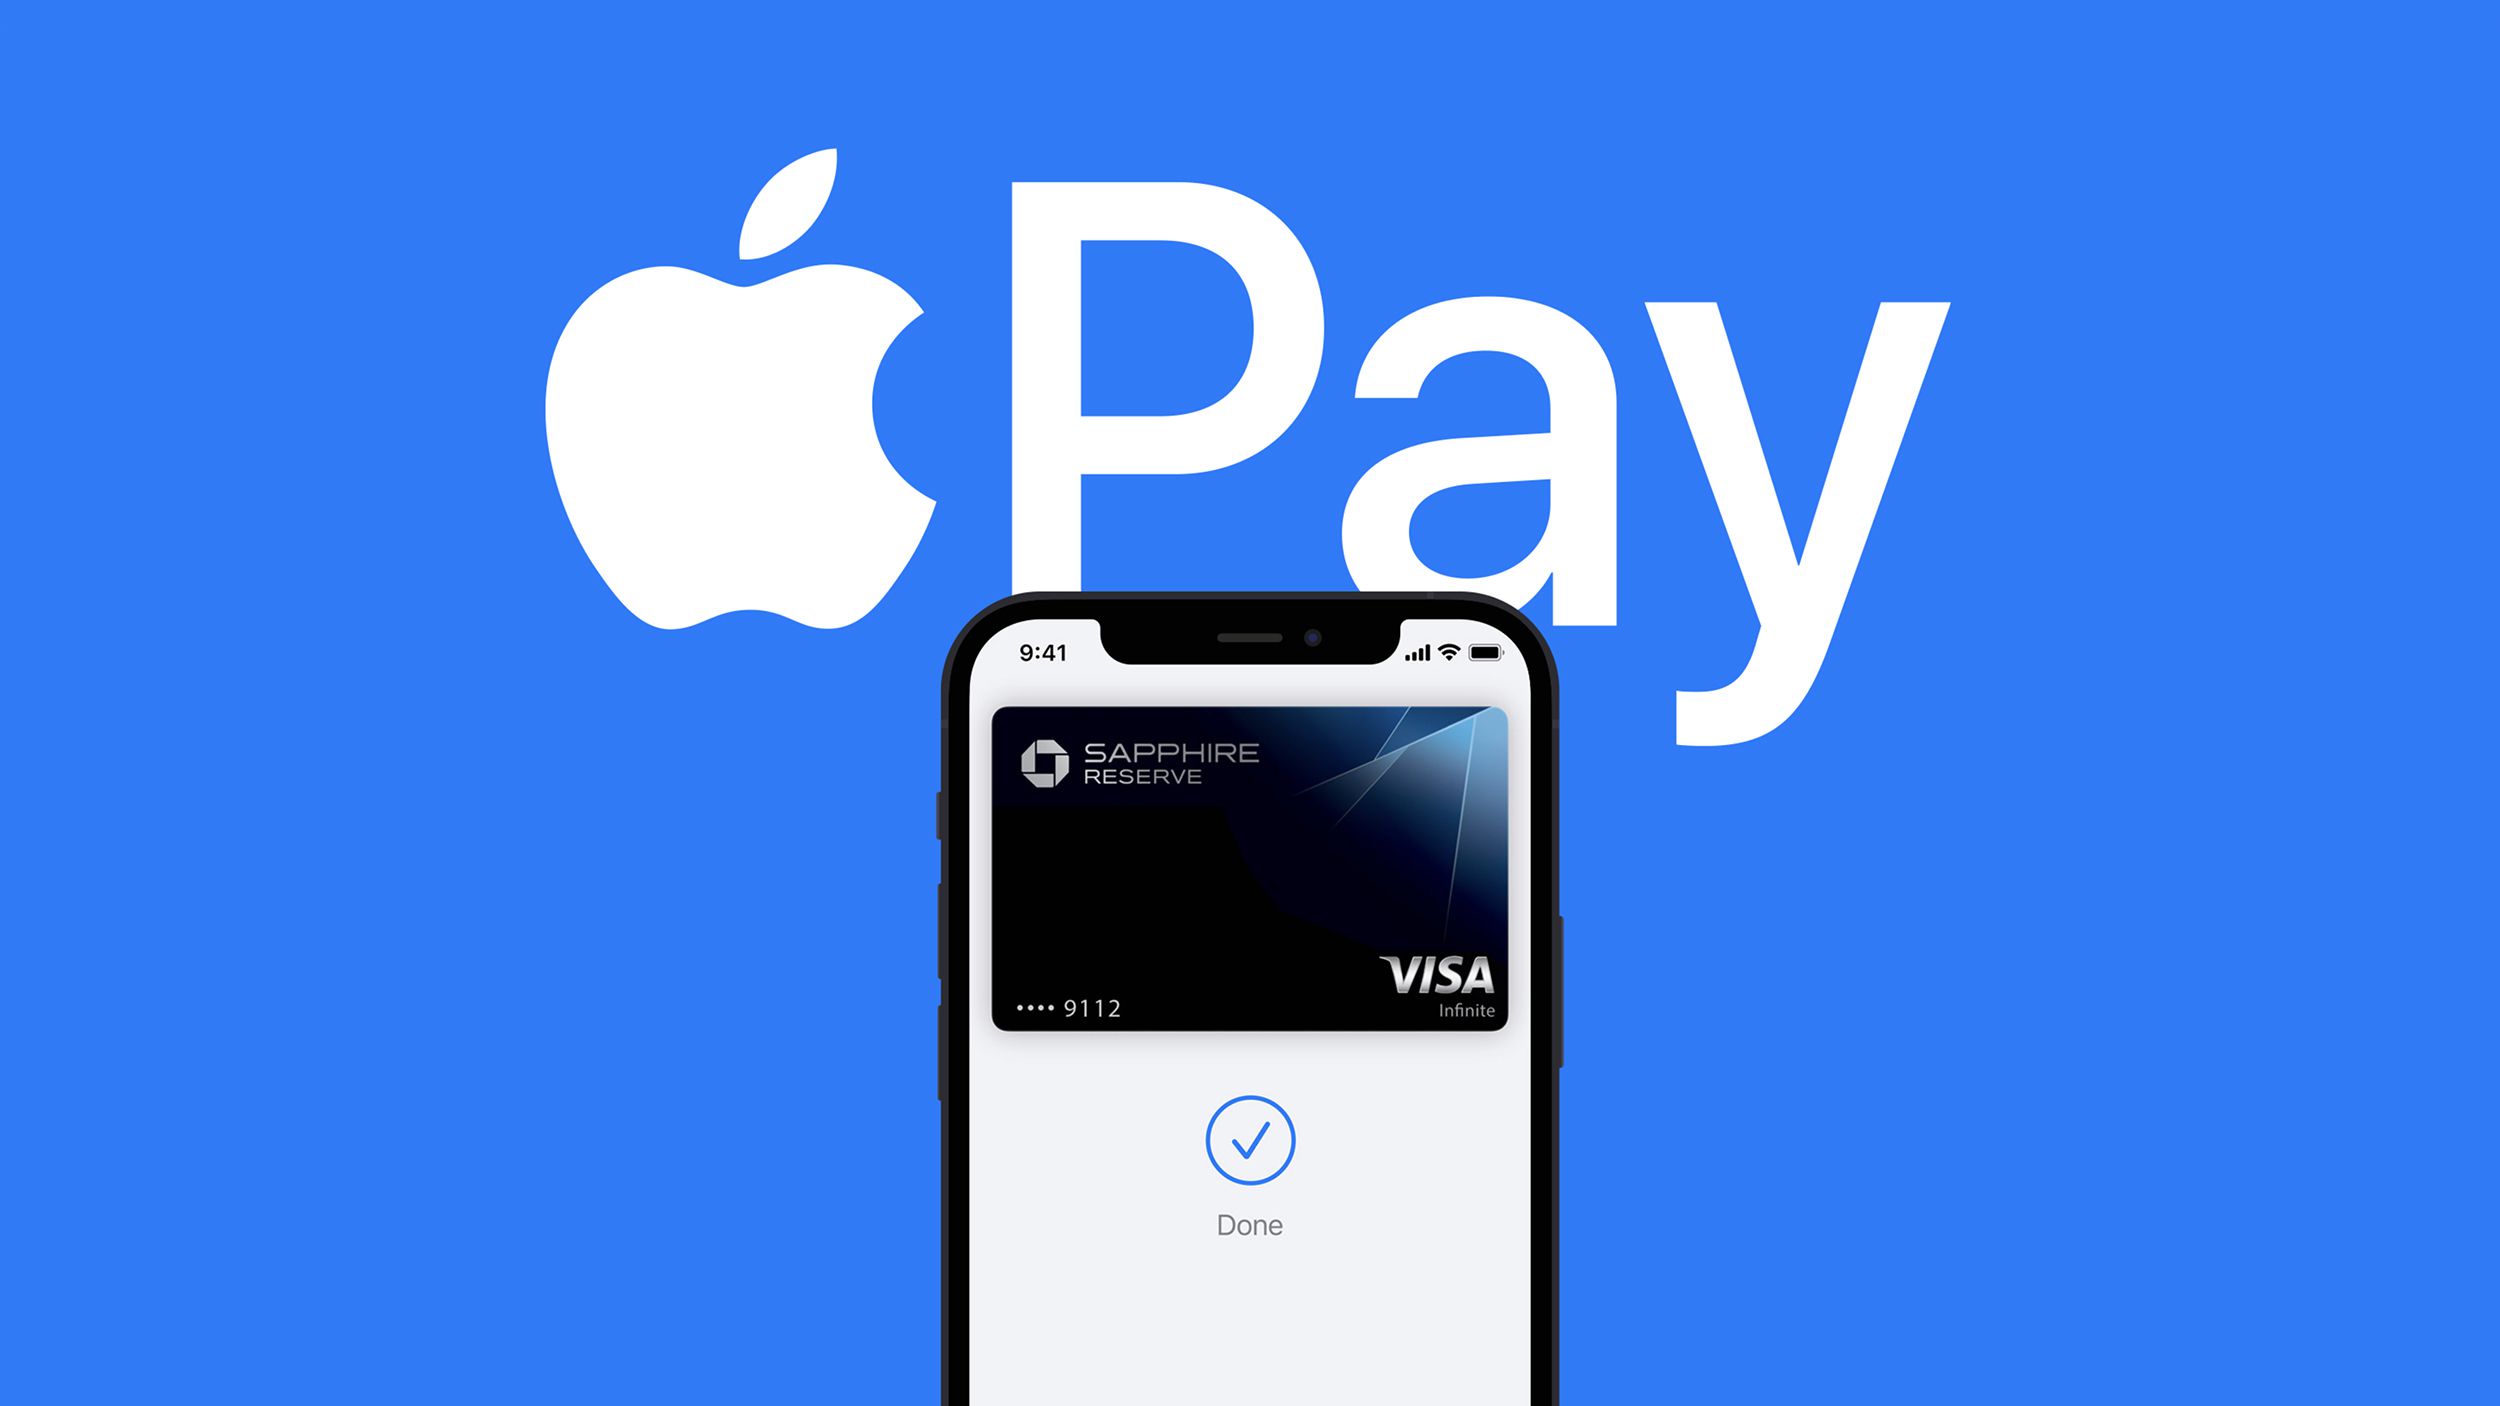 Apple Sued for Blocking Tap-to-Pay Competitors on iPhone